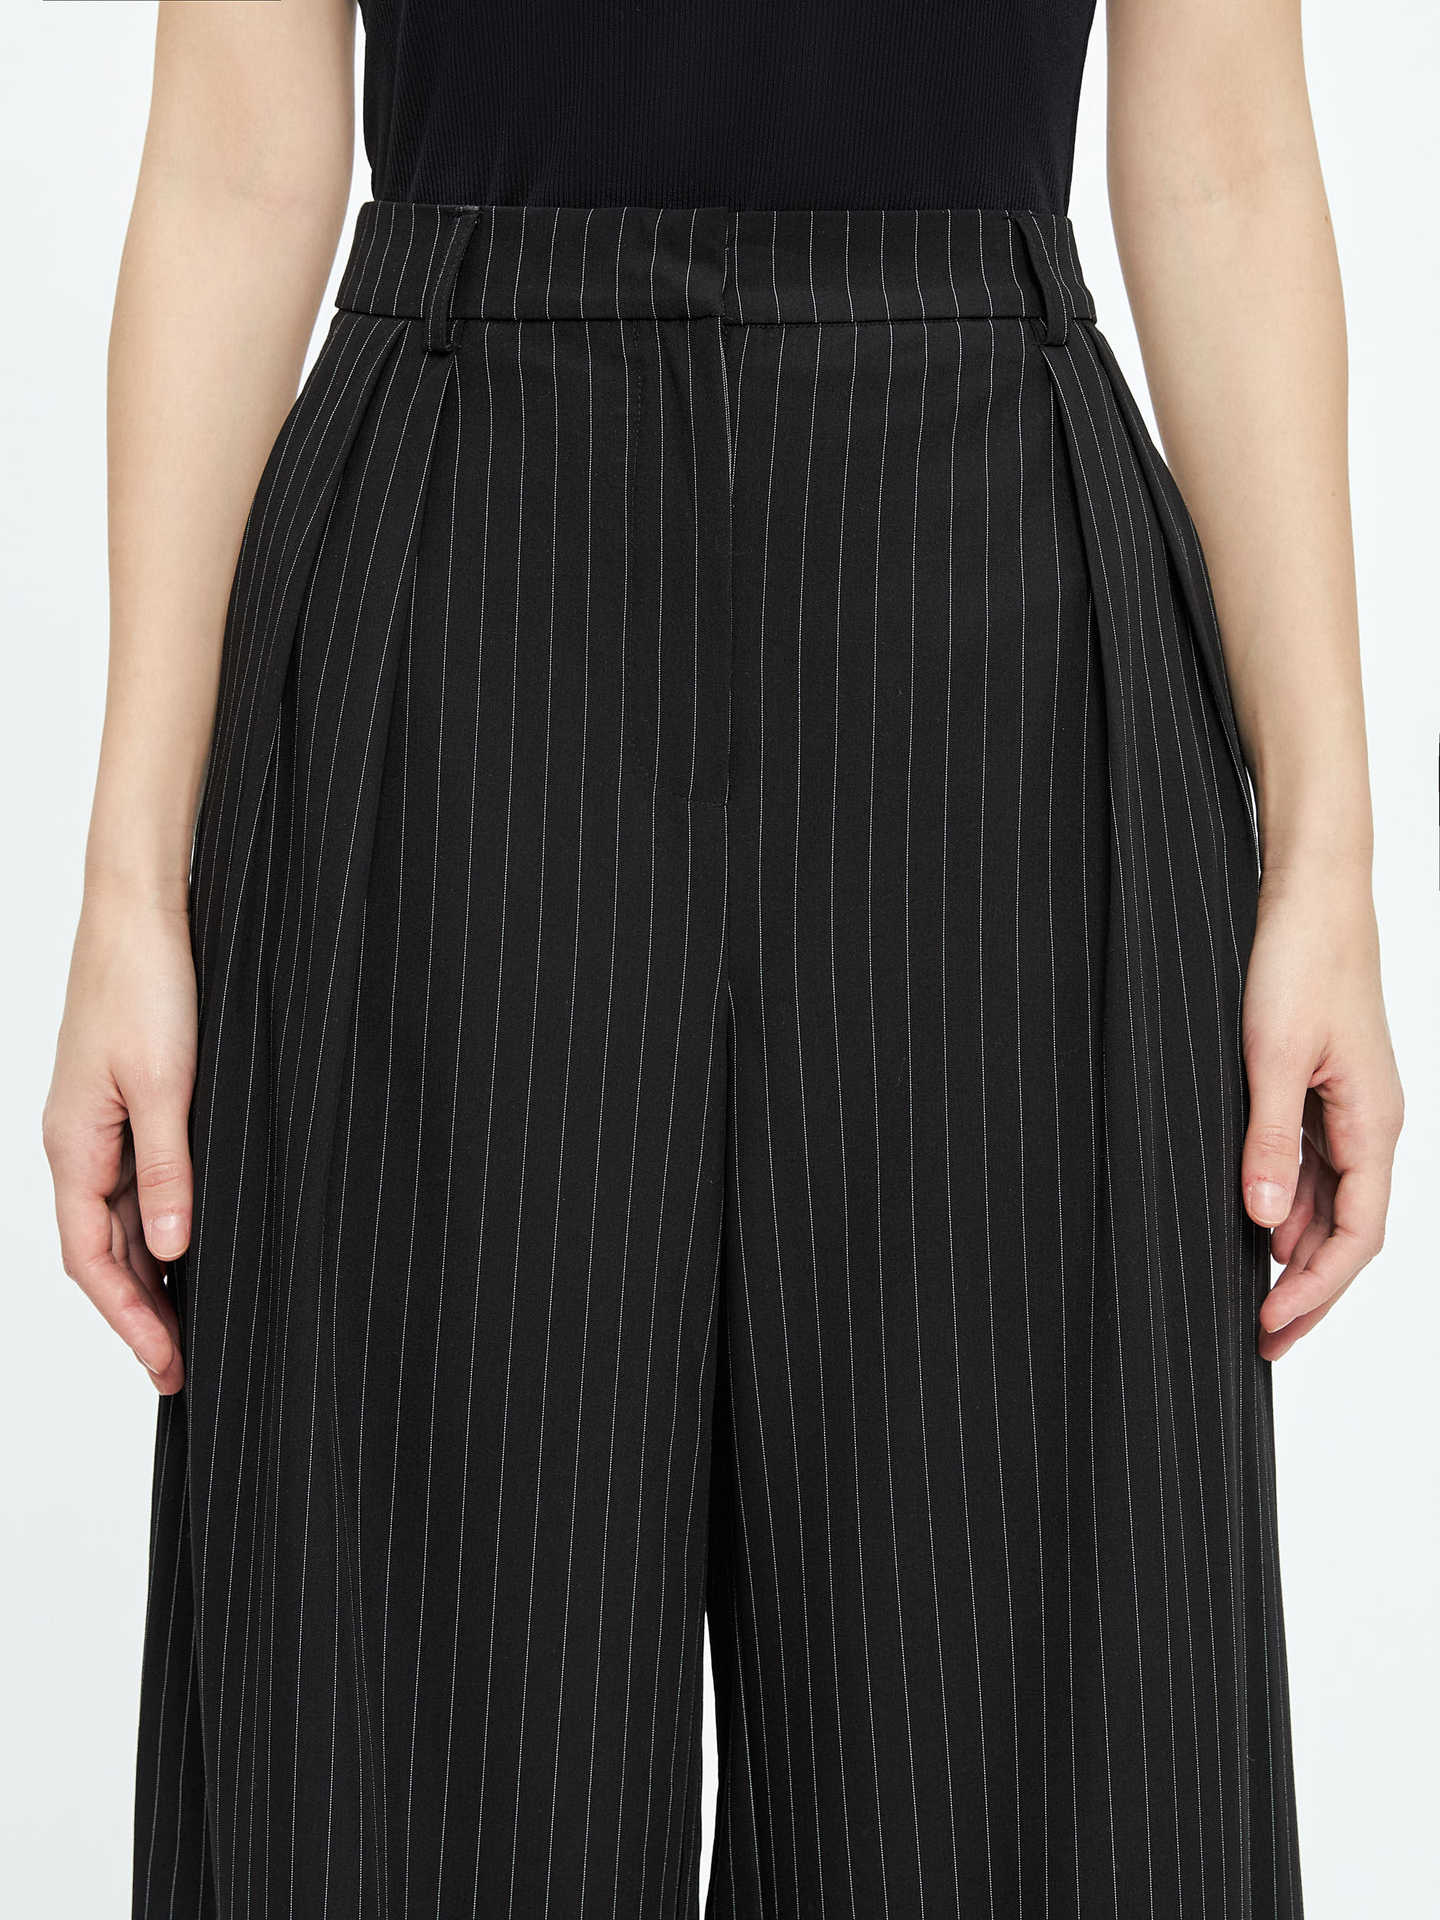 Women's Casual Striped High Waisted Loose Pants-Buy 2 Free Shipping